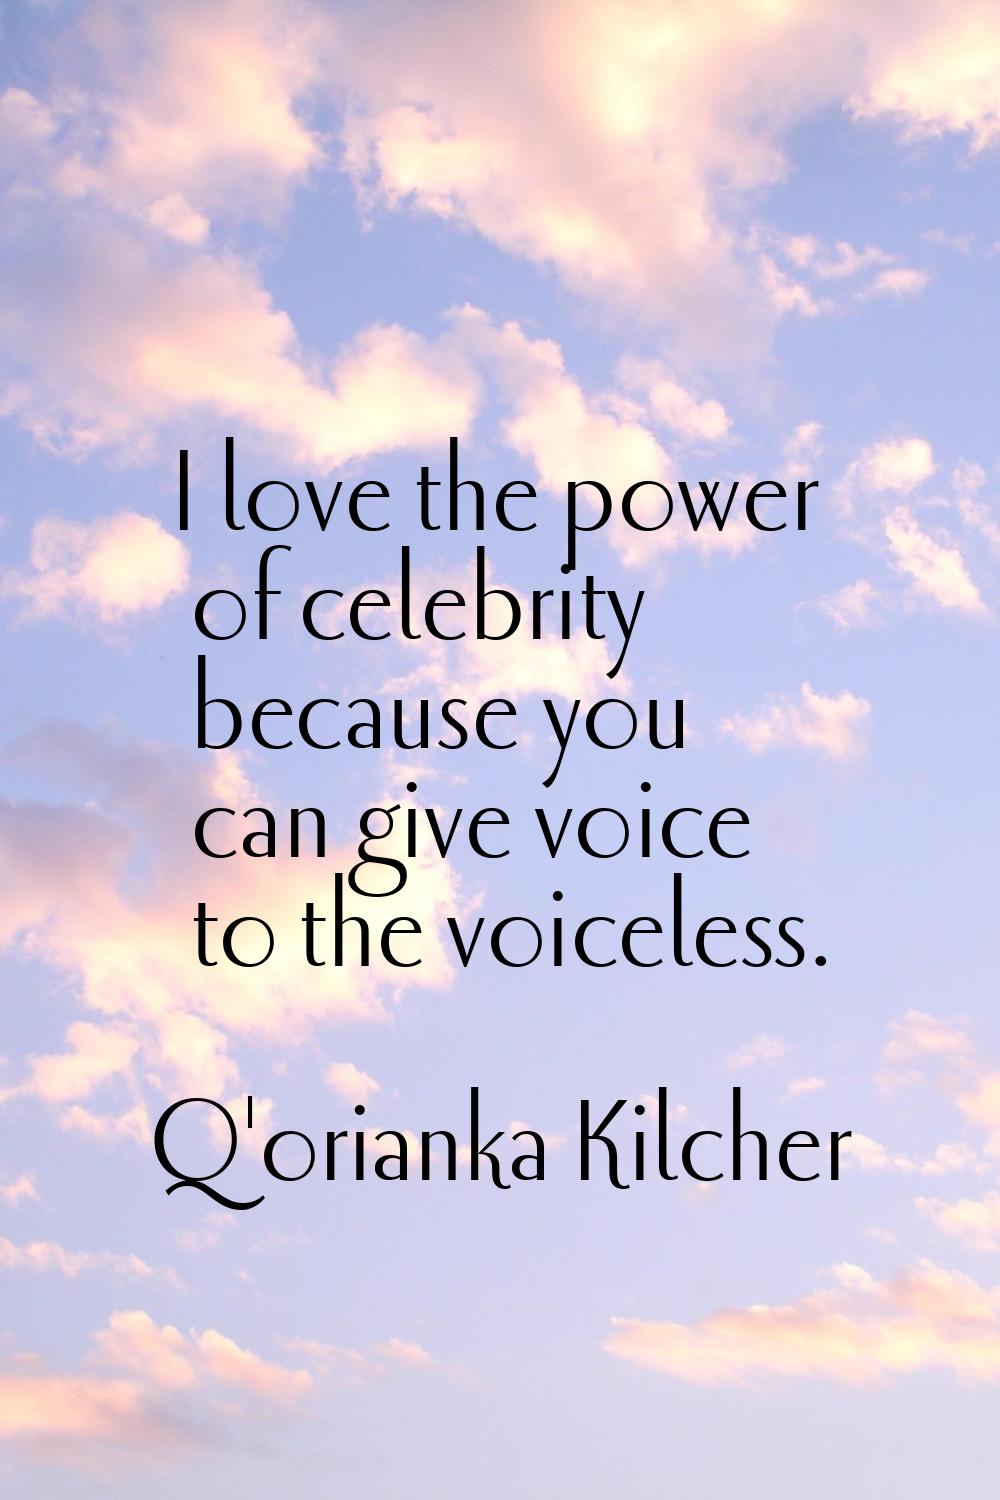 I love the power of celebrity because you can give voice to the voiceless.